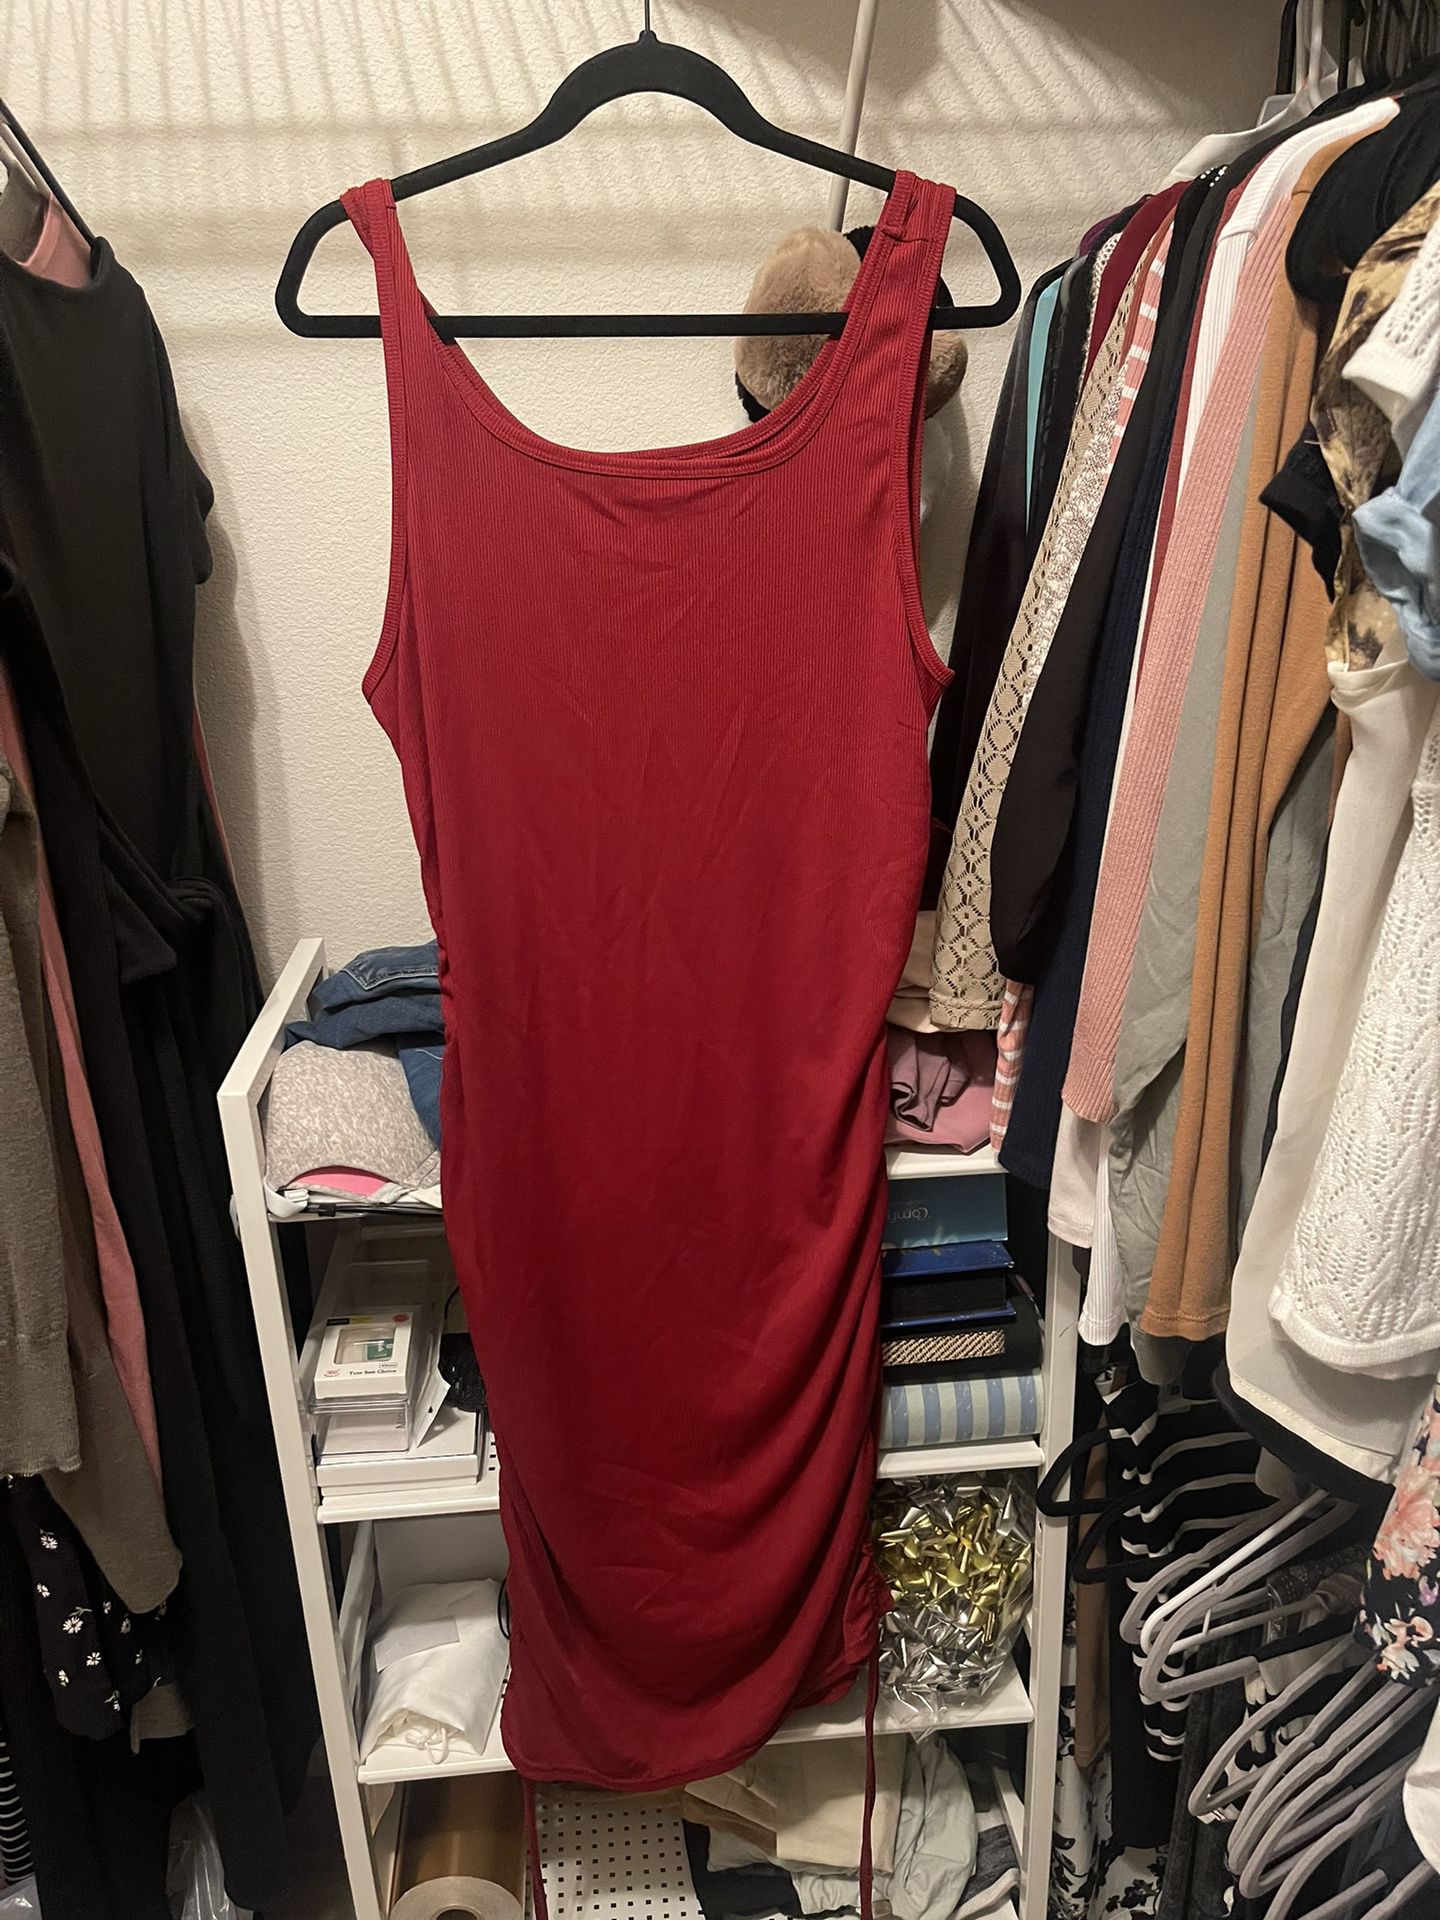 Xl Red Dress Stretch Material New . Pick Up Only 